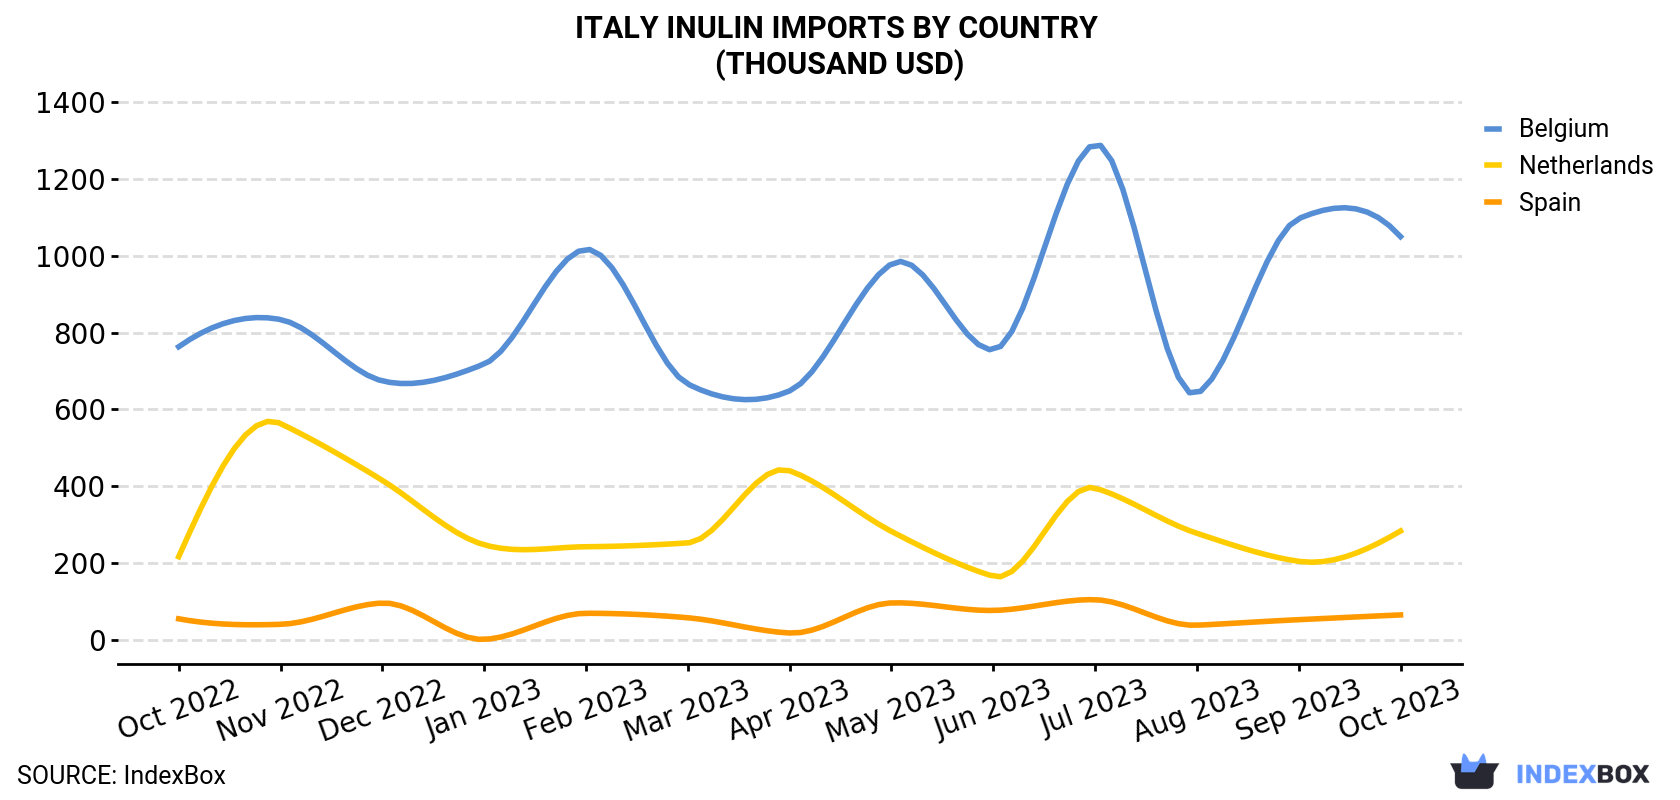 Italy Inulin Imports By Country (Thousand USD)